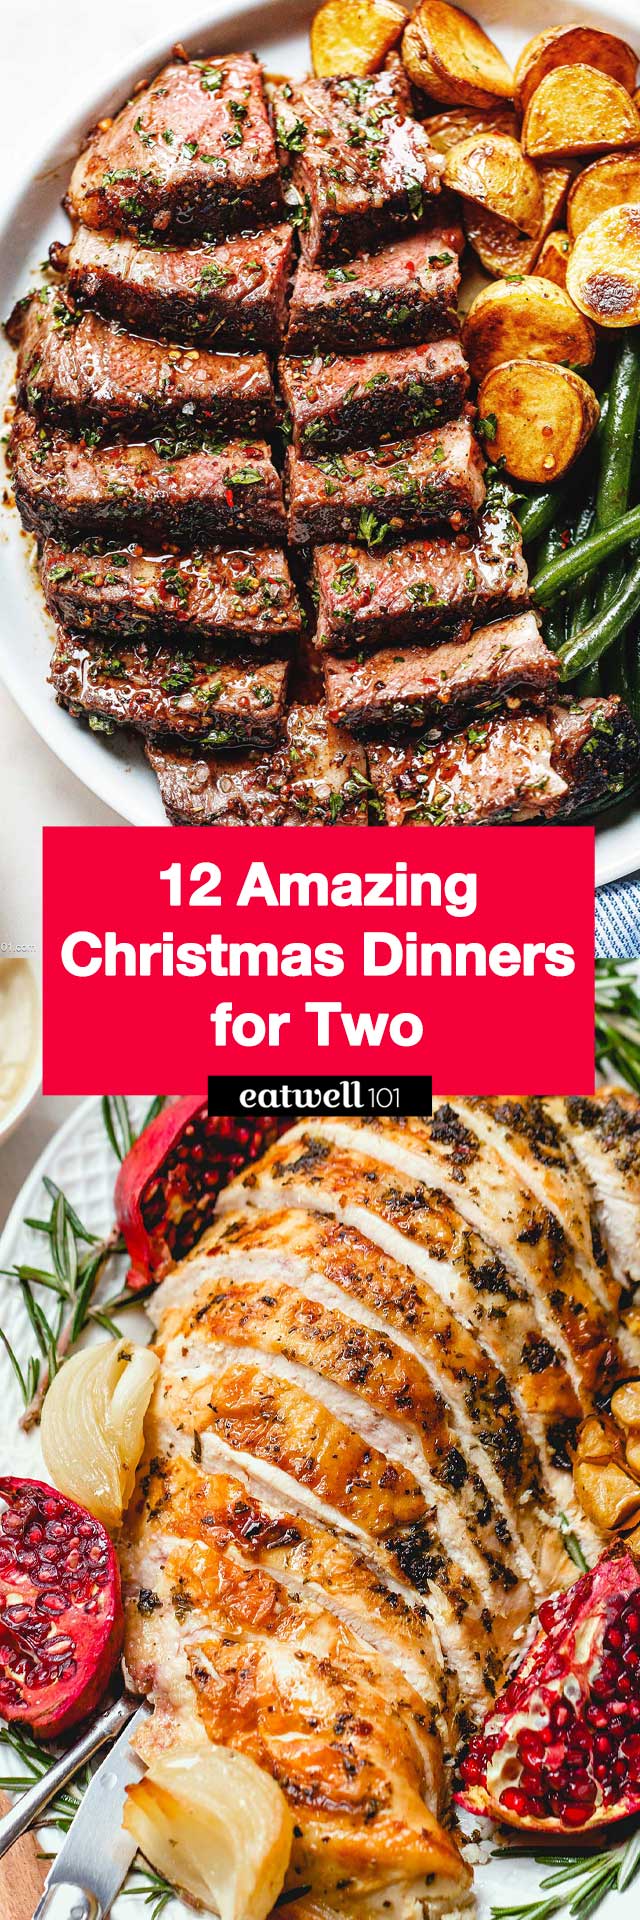 Christmas Recipes for Two - #christmas #holiday #recipes #eatwell101 - Our festive Christmas dinner recipes for two make the most of fewer ingredients, so your Christmas dinner will be even more special. 